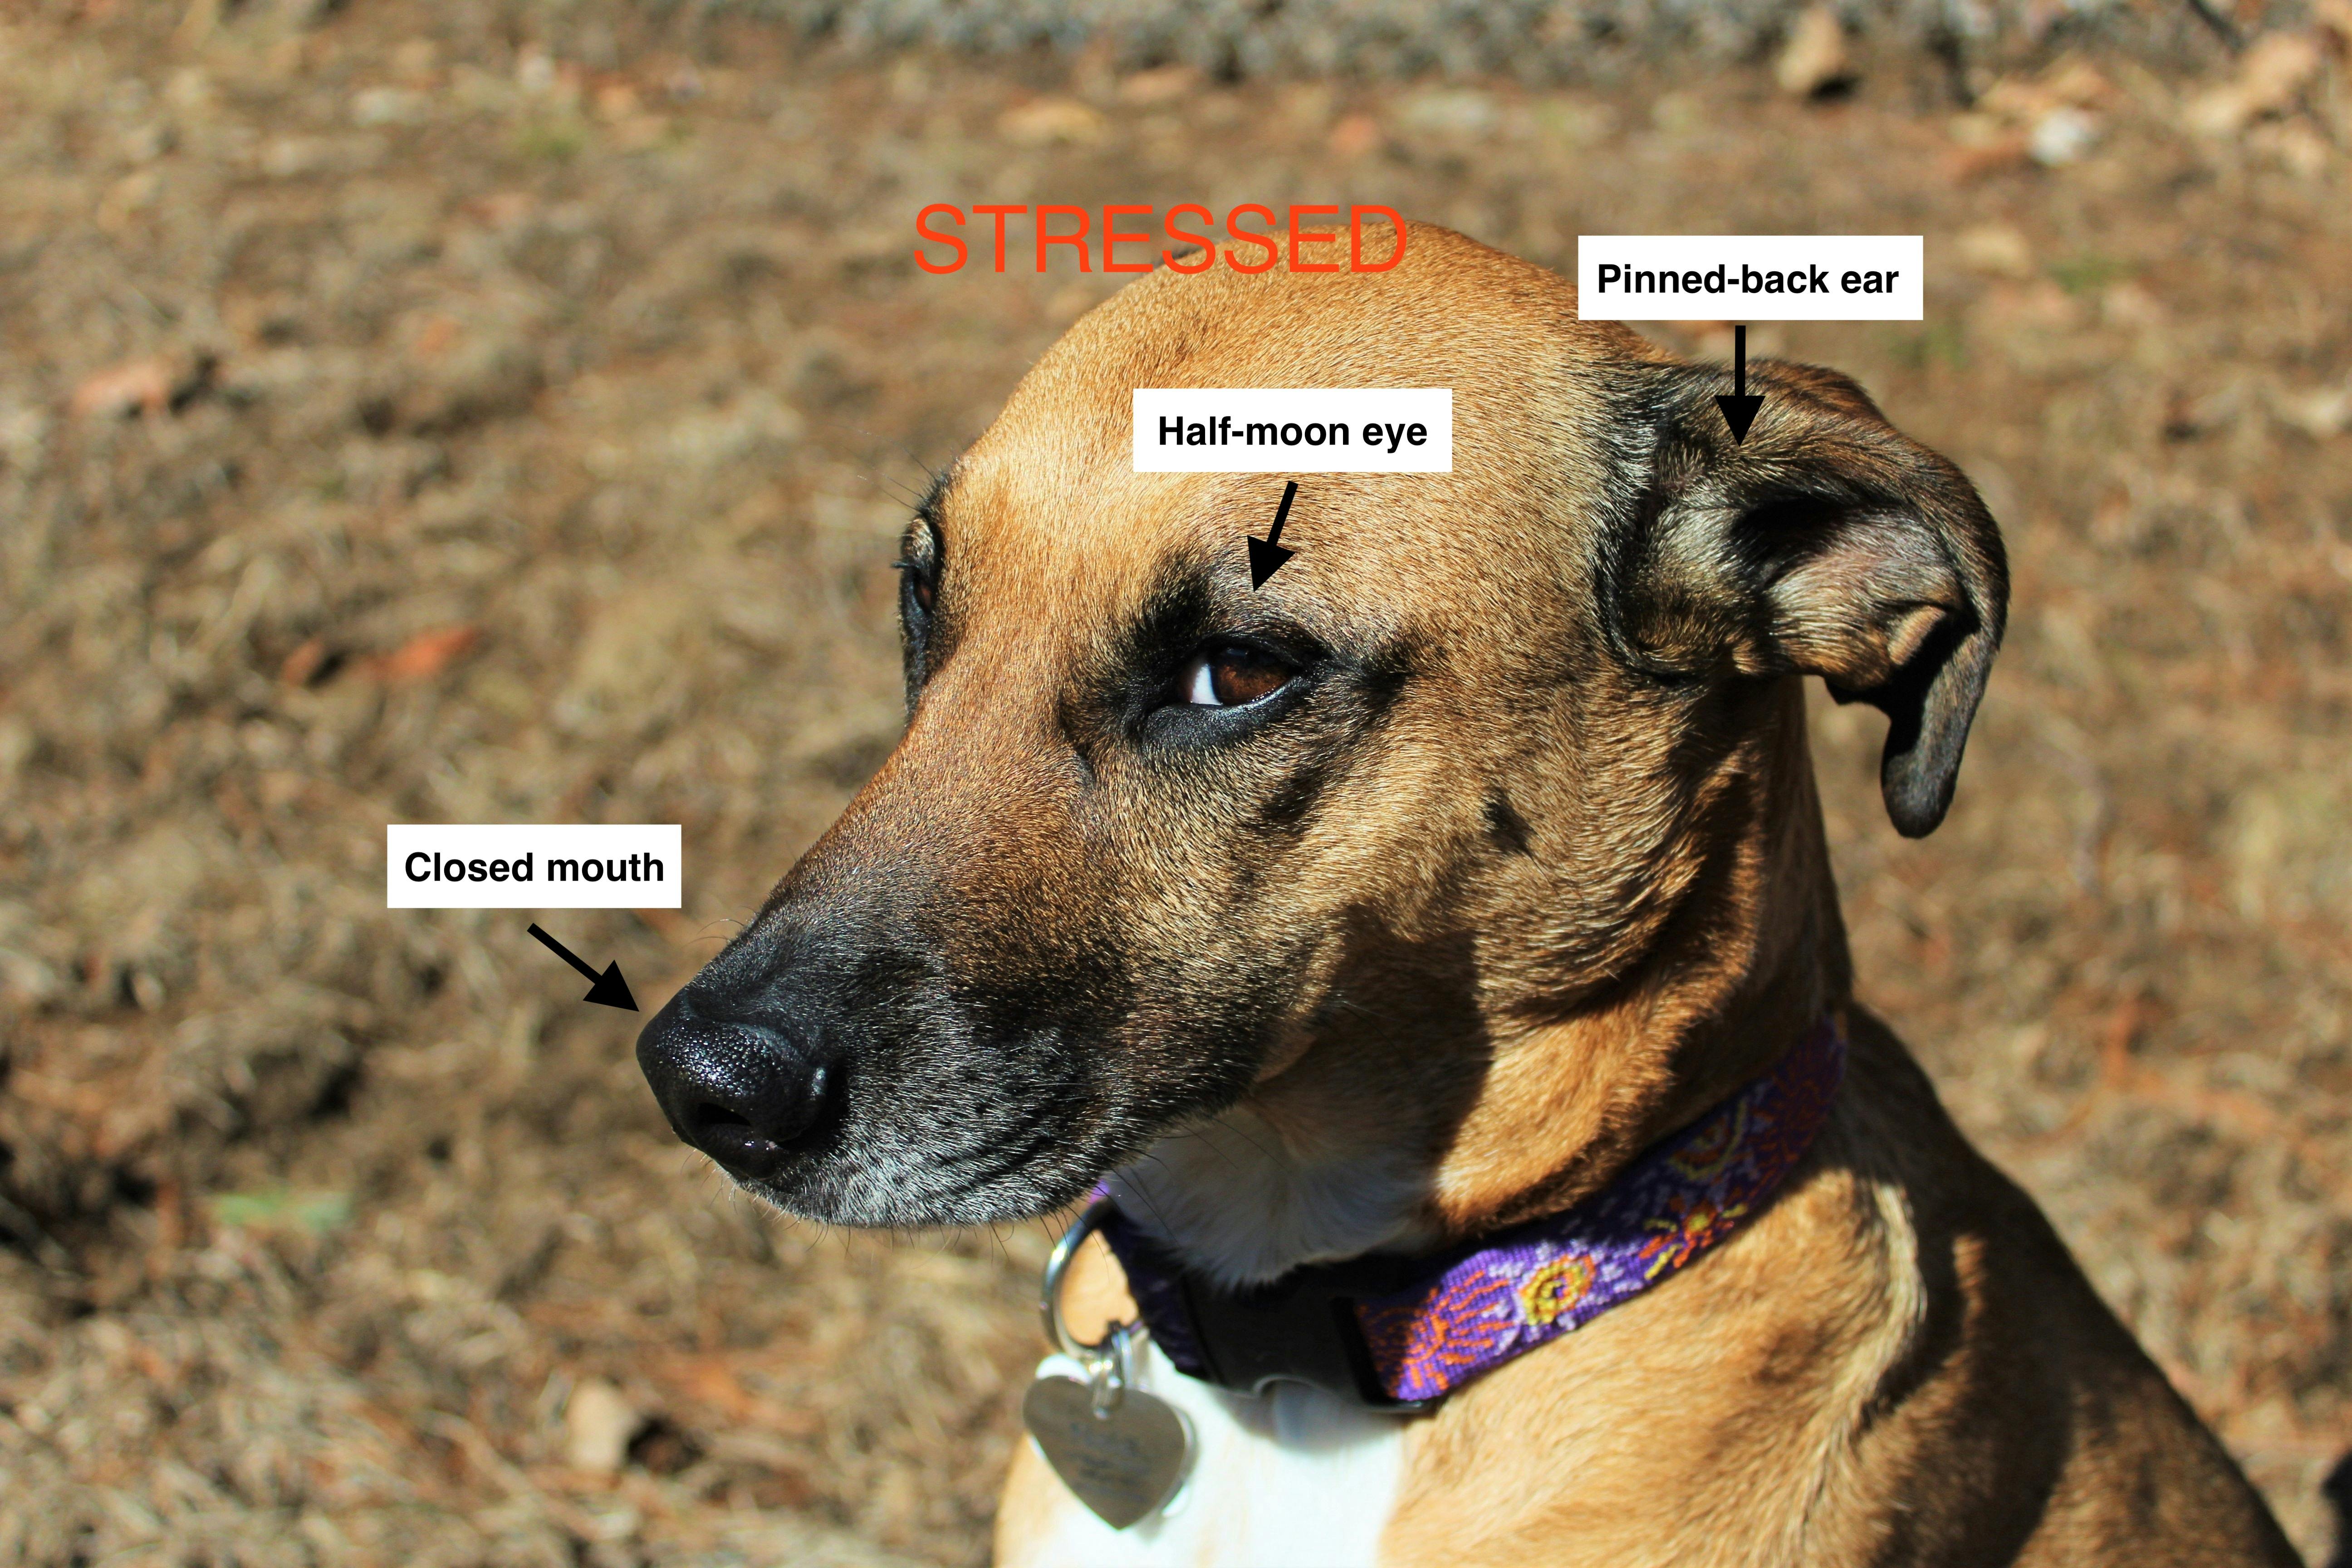 Words overlay an image of a dog looking stressed, showing the half-moon eye, pinned by ear, and tight mouth